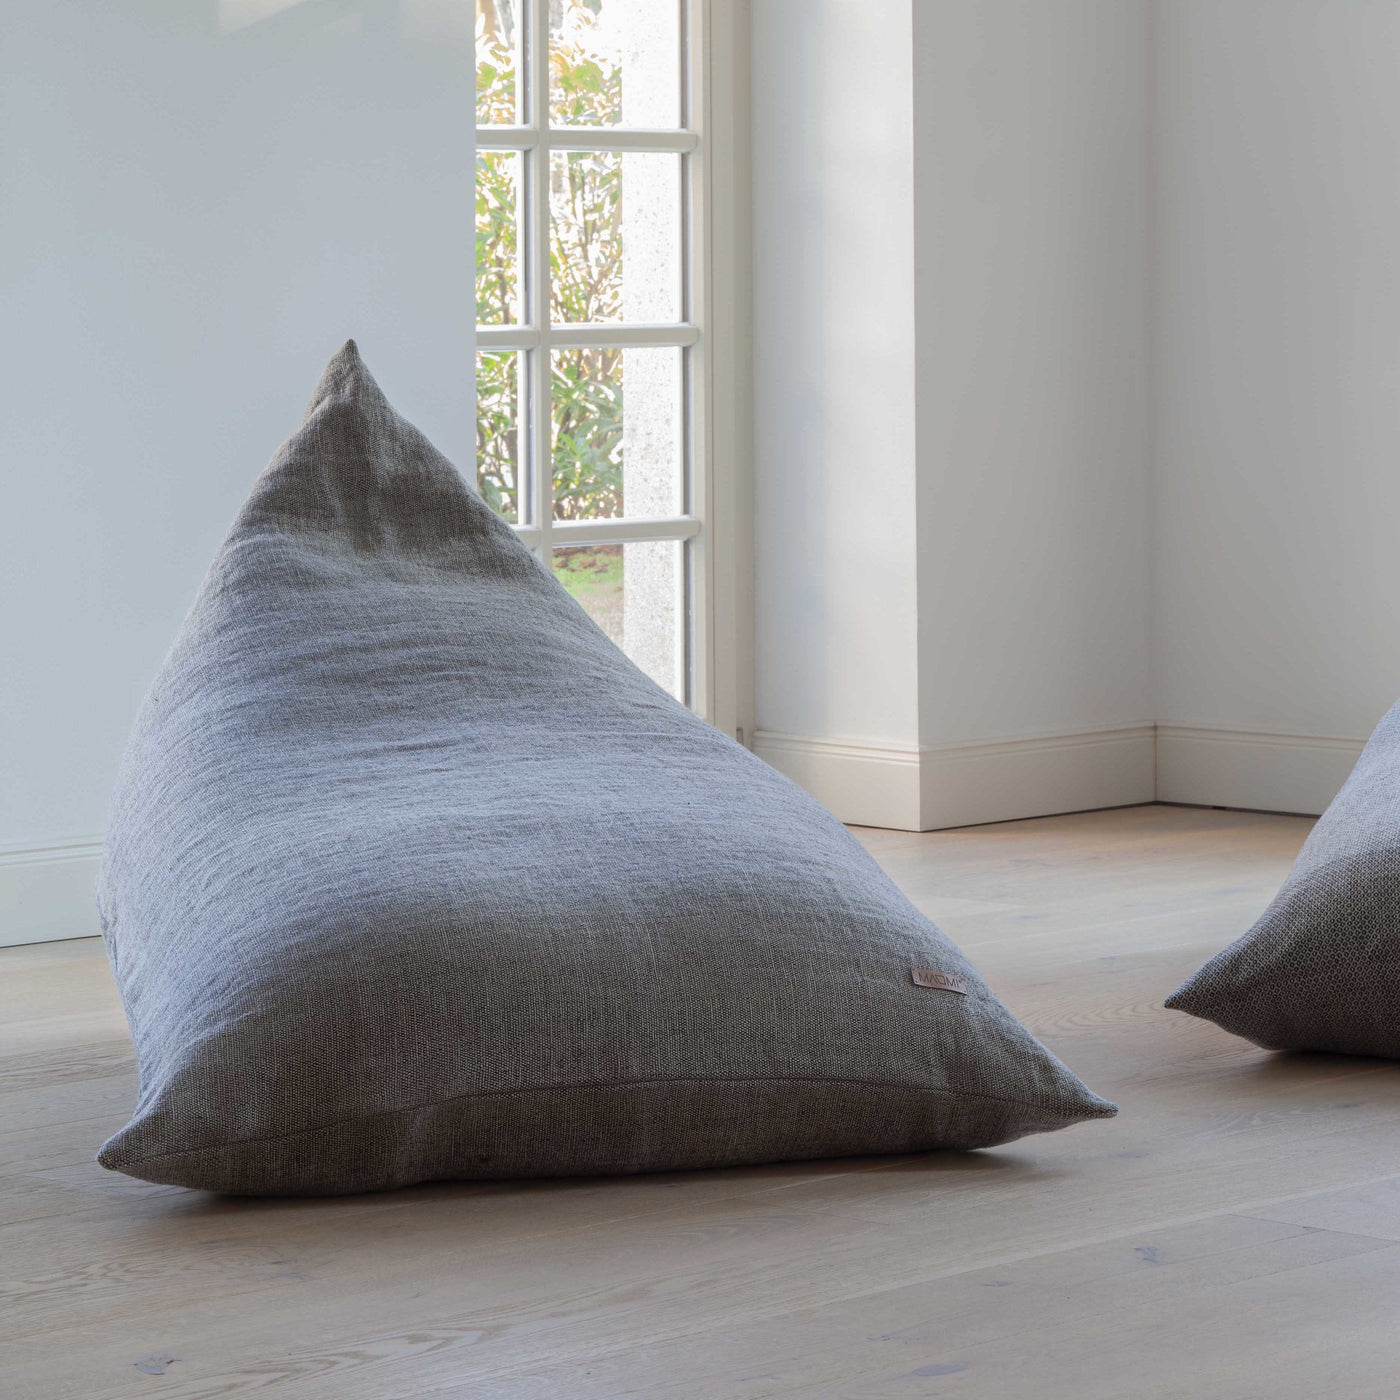 Noggi Linen Beanbag-Furnishings-CHAIRS-Forest Homes-Nature inspired decor-Nature decor